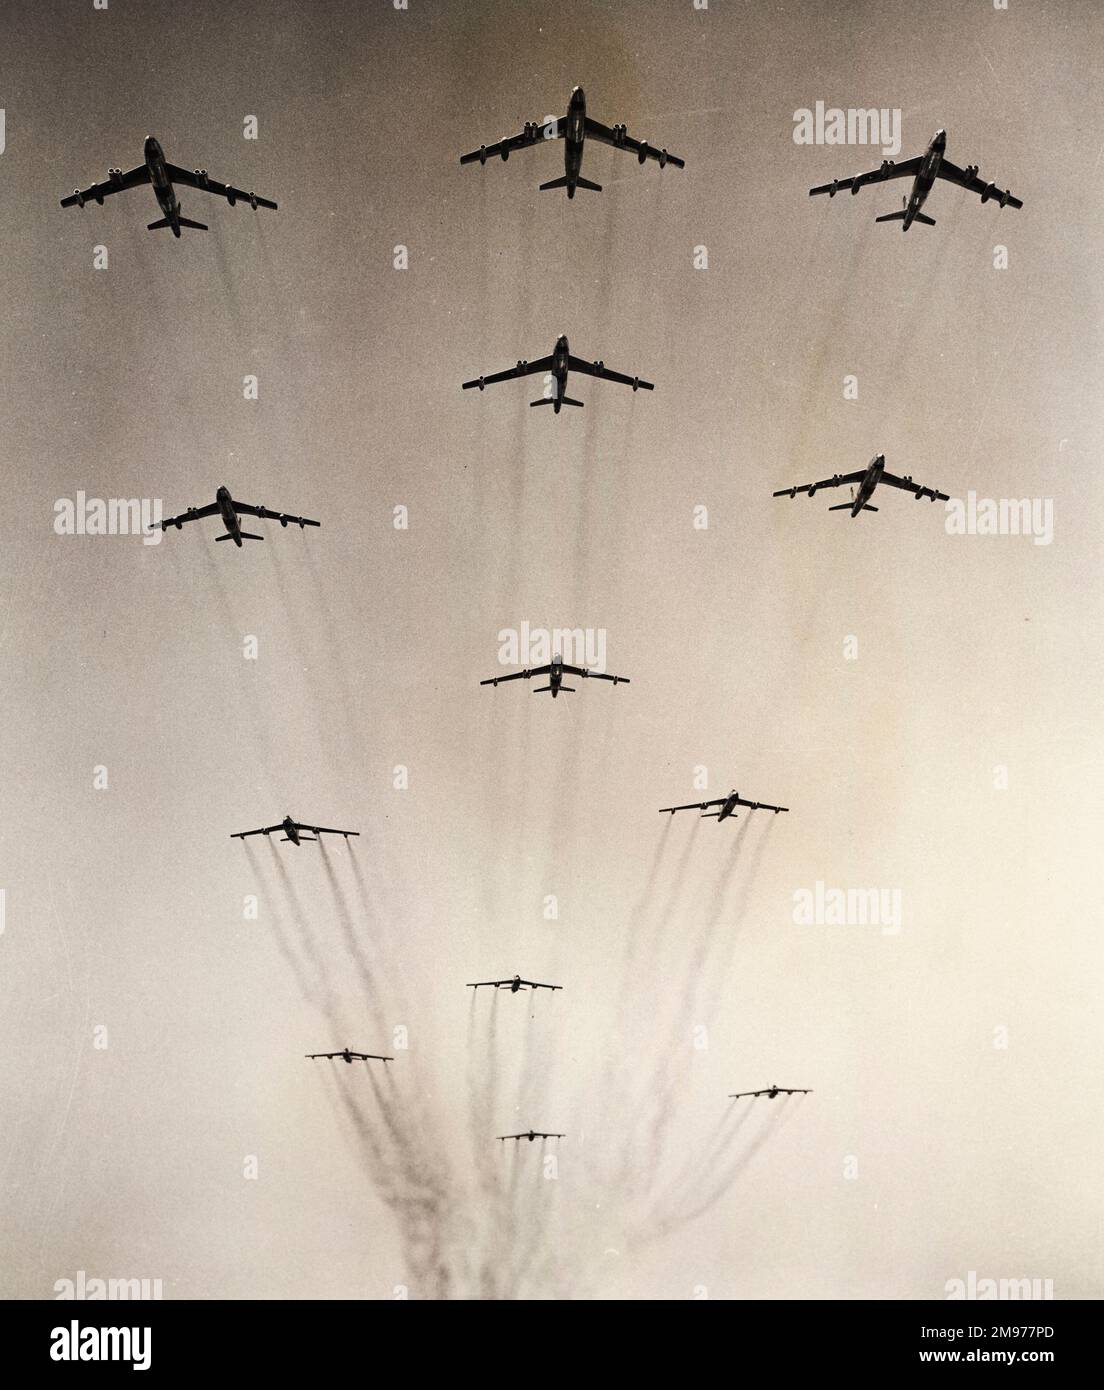 Boeing B-47 Stratojets in formation. Stock Photo